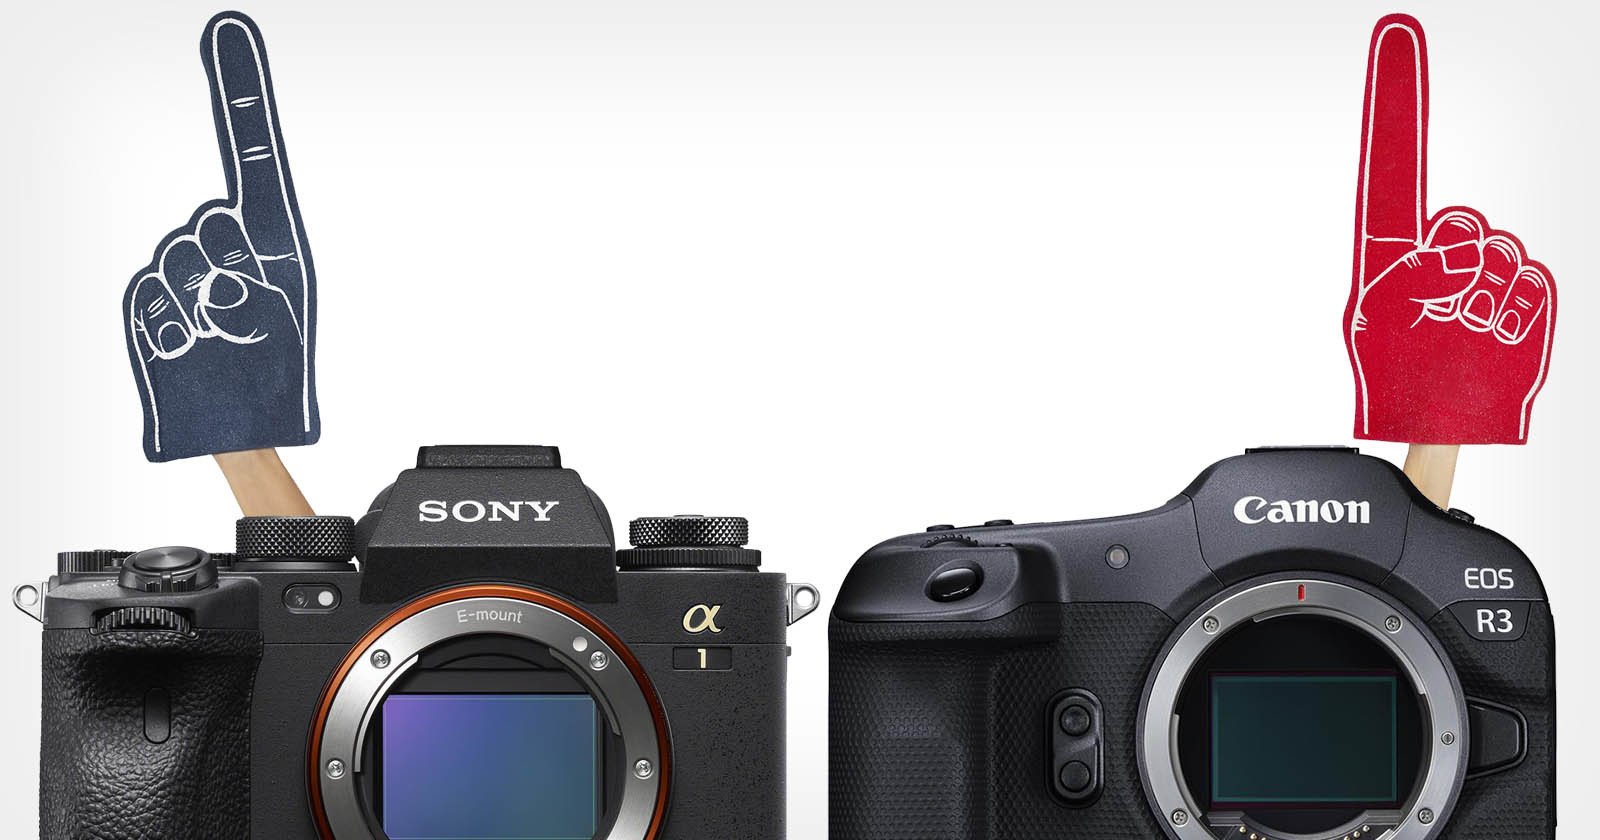 Sony and Canon Both Claim to Be #1 in Mirrorless Cameras  Who Really Is?